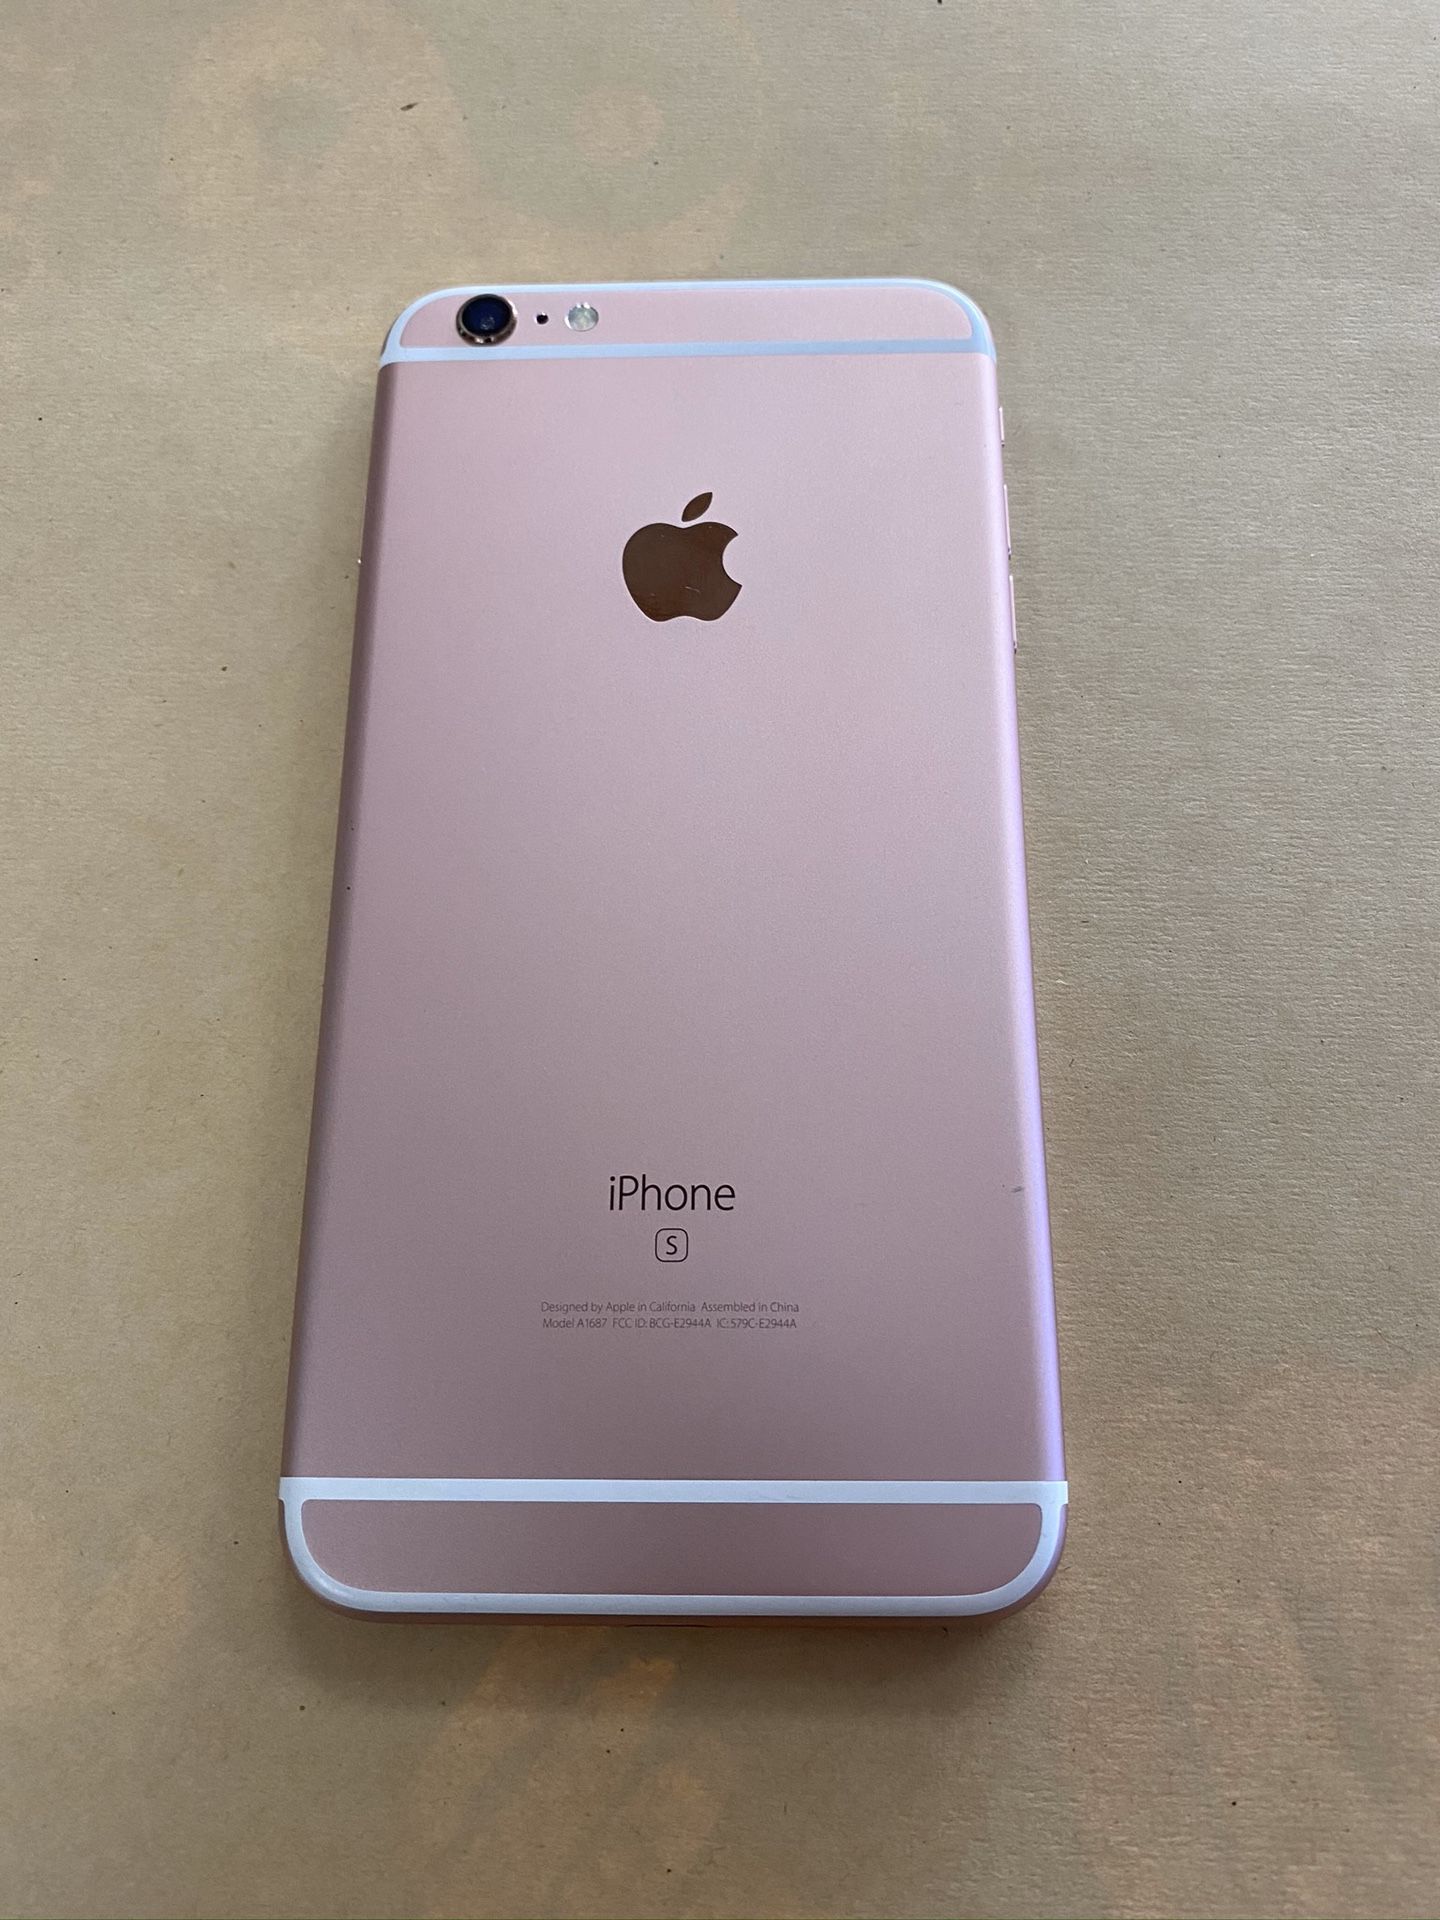 iPhone 6s Plus 16gb unlocked mint condition, rose Gold.